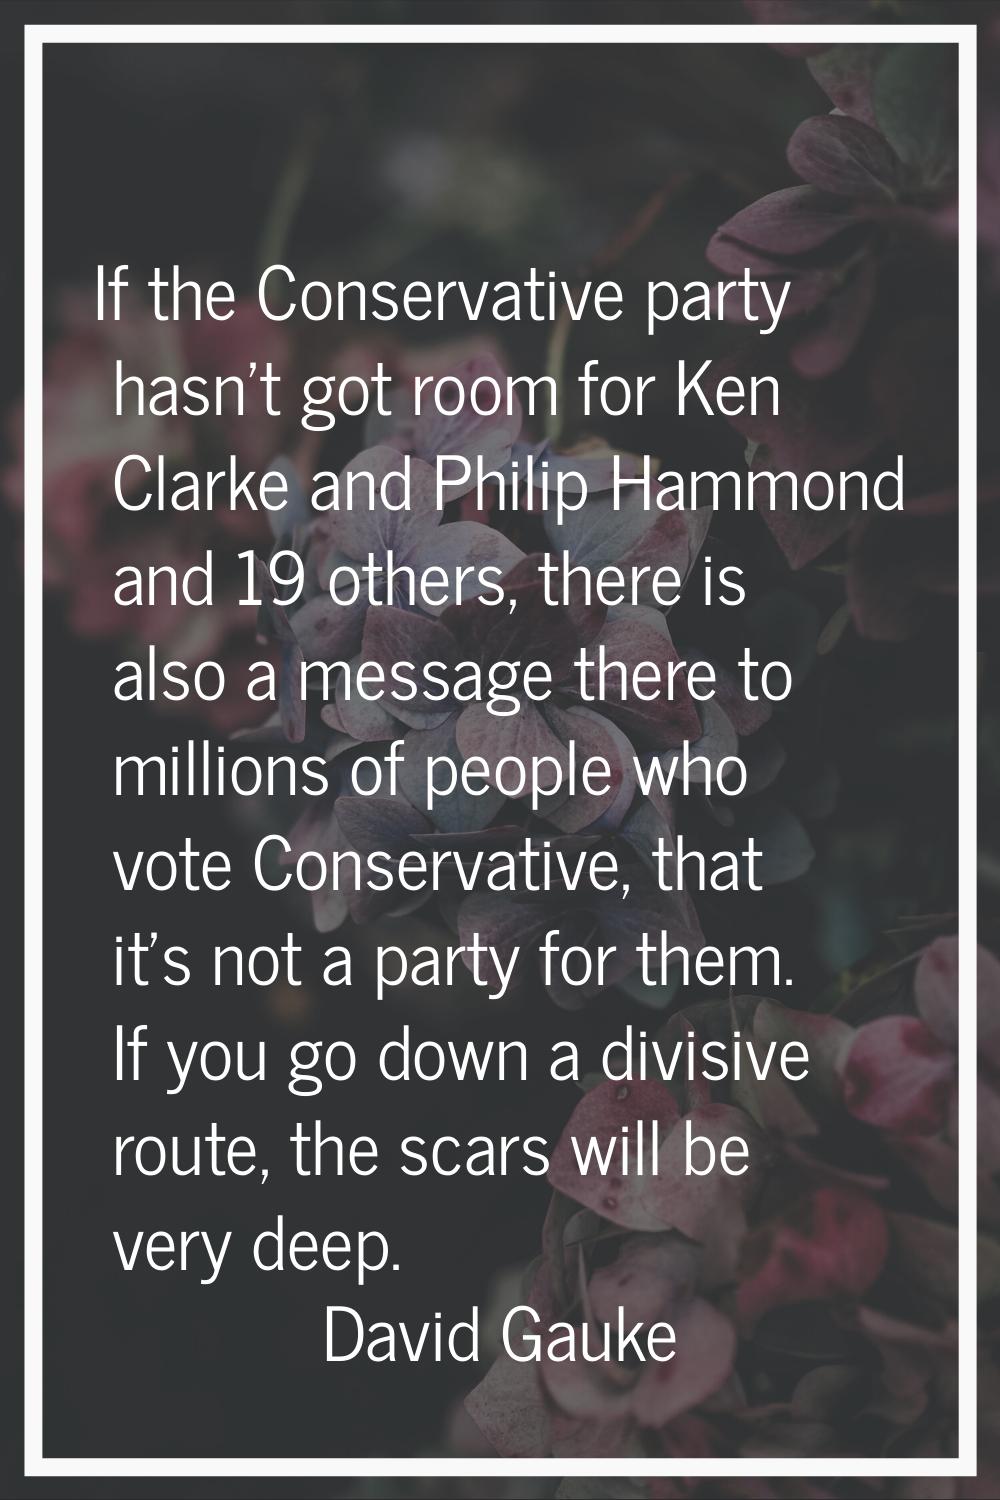 If the Conservative party hasn’t got room for Ken Clarke and Philip Hammond and 19 others, there is